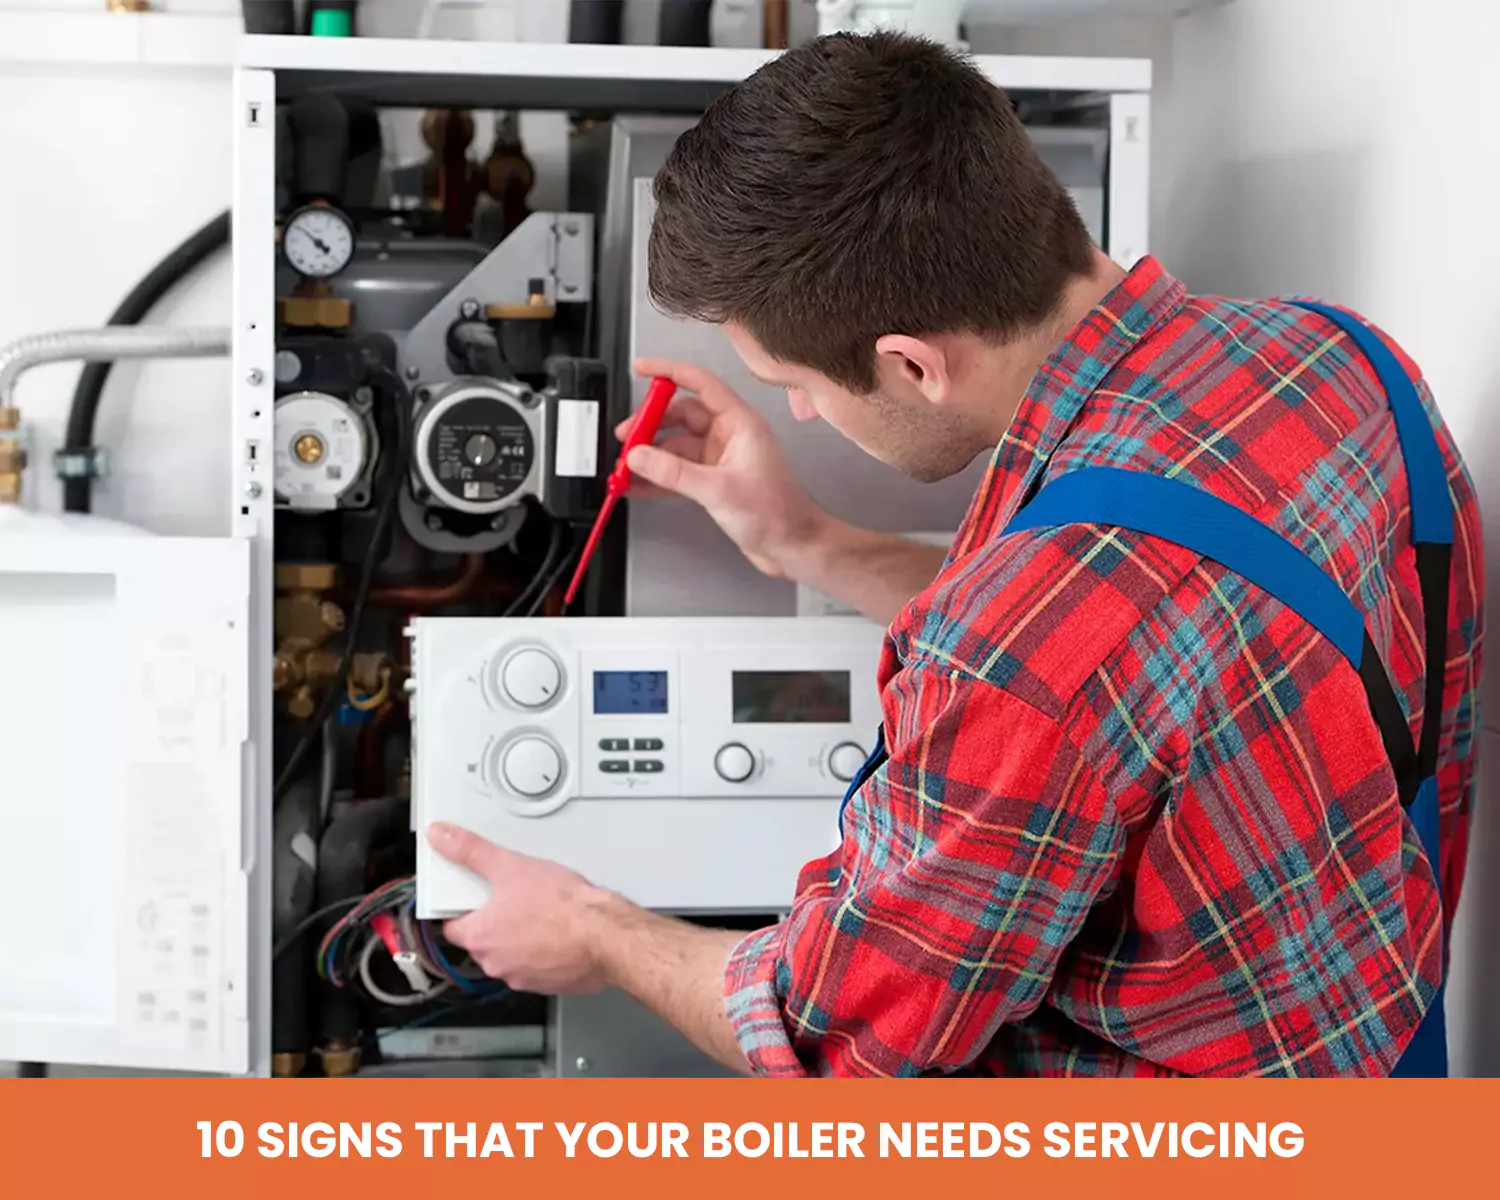 10 Signs That Your Boiler Needs Servicing